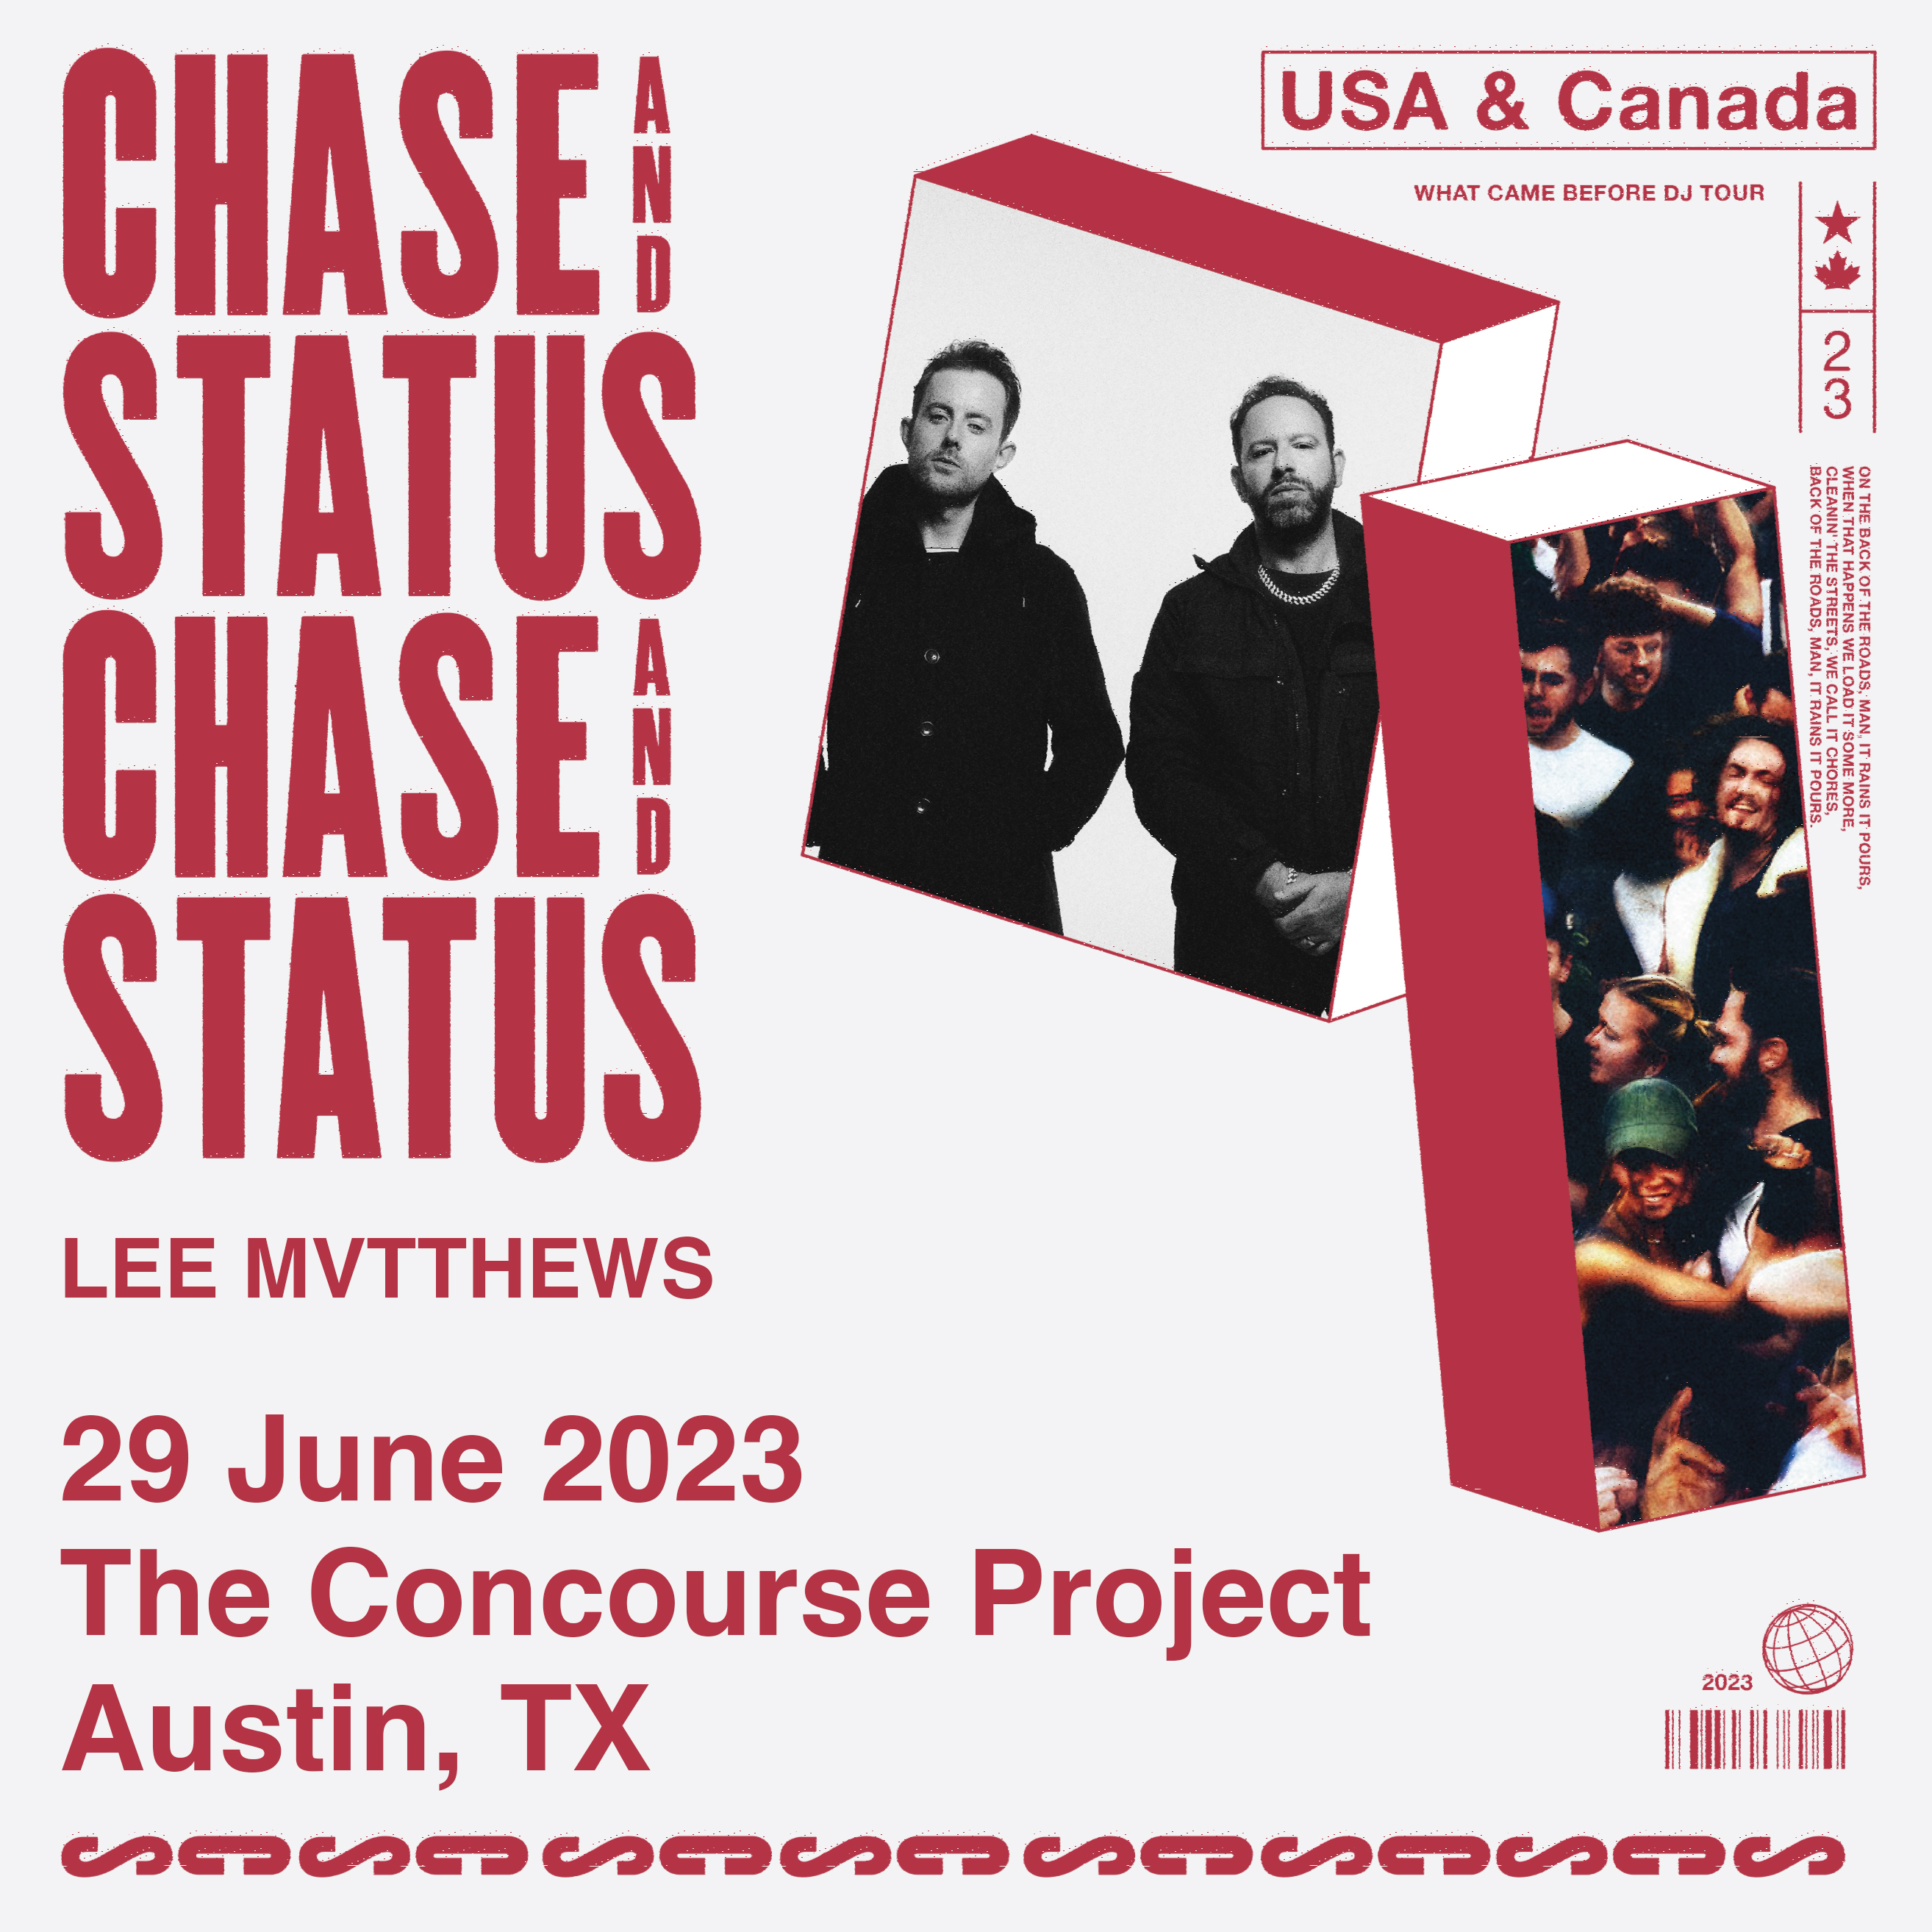 Chase & Status + Lee Mvtthews at The Concourse Project